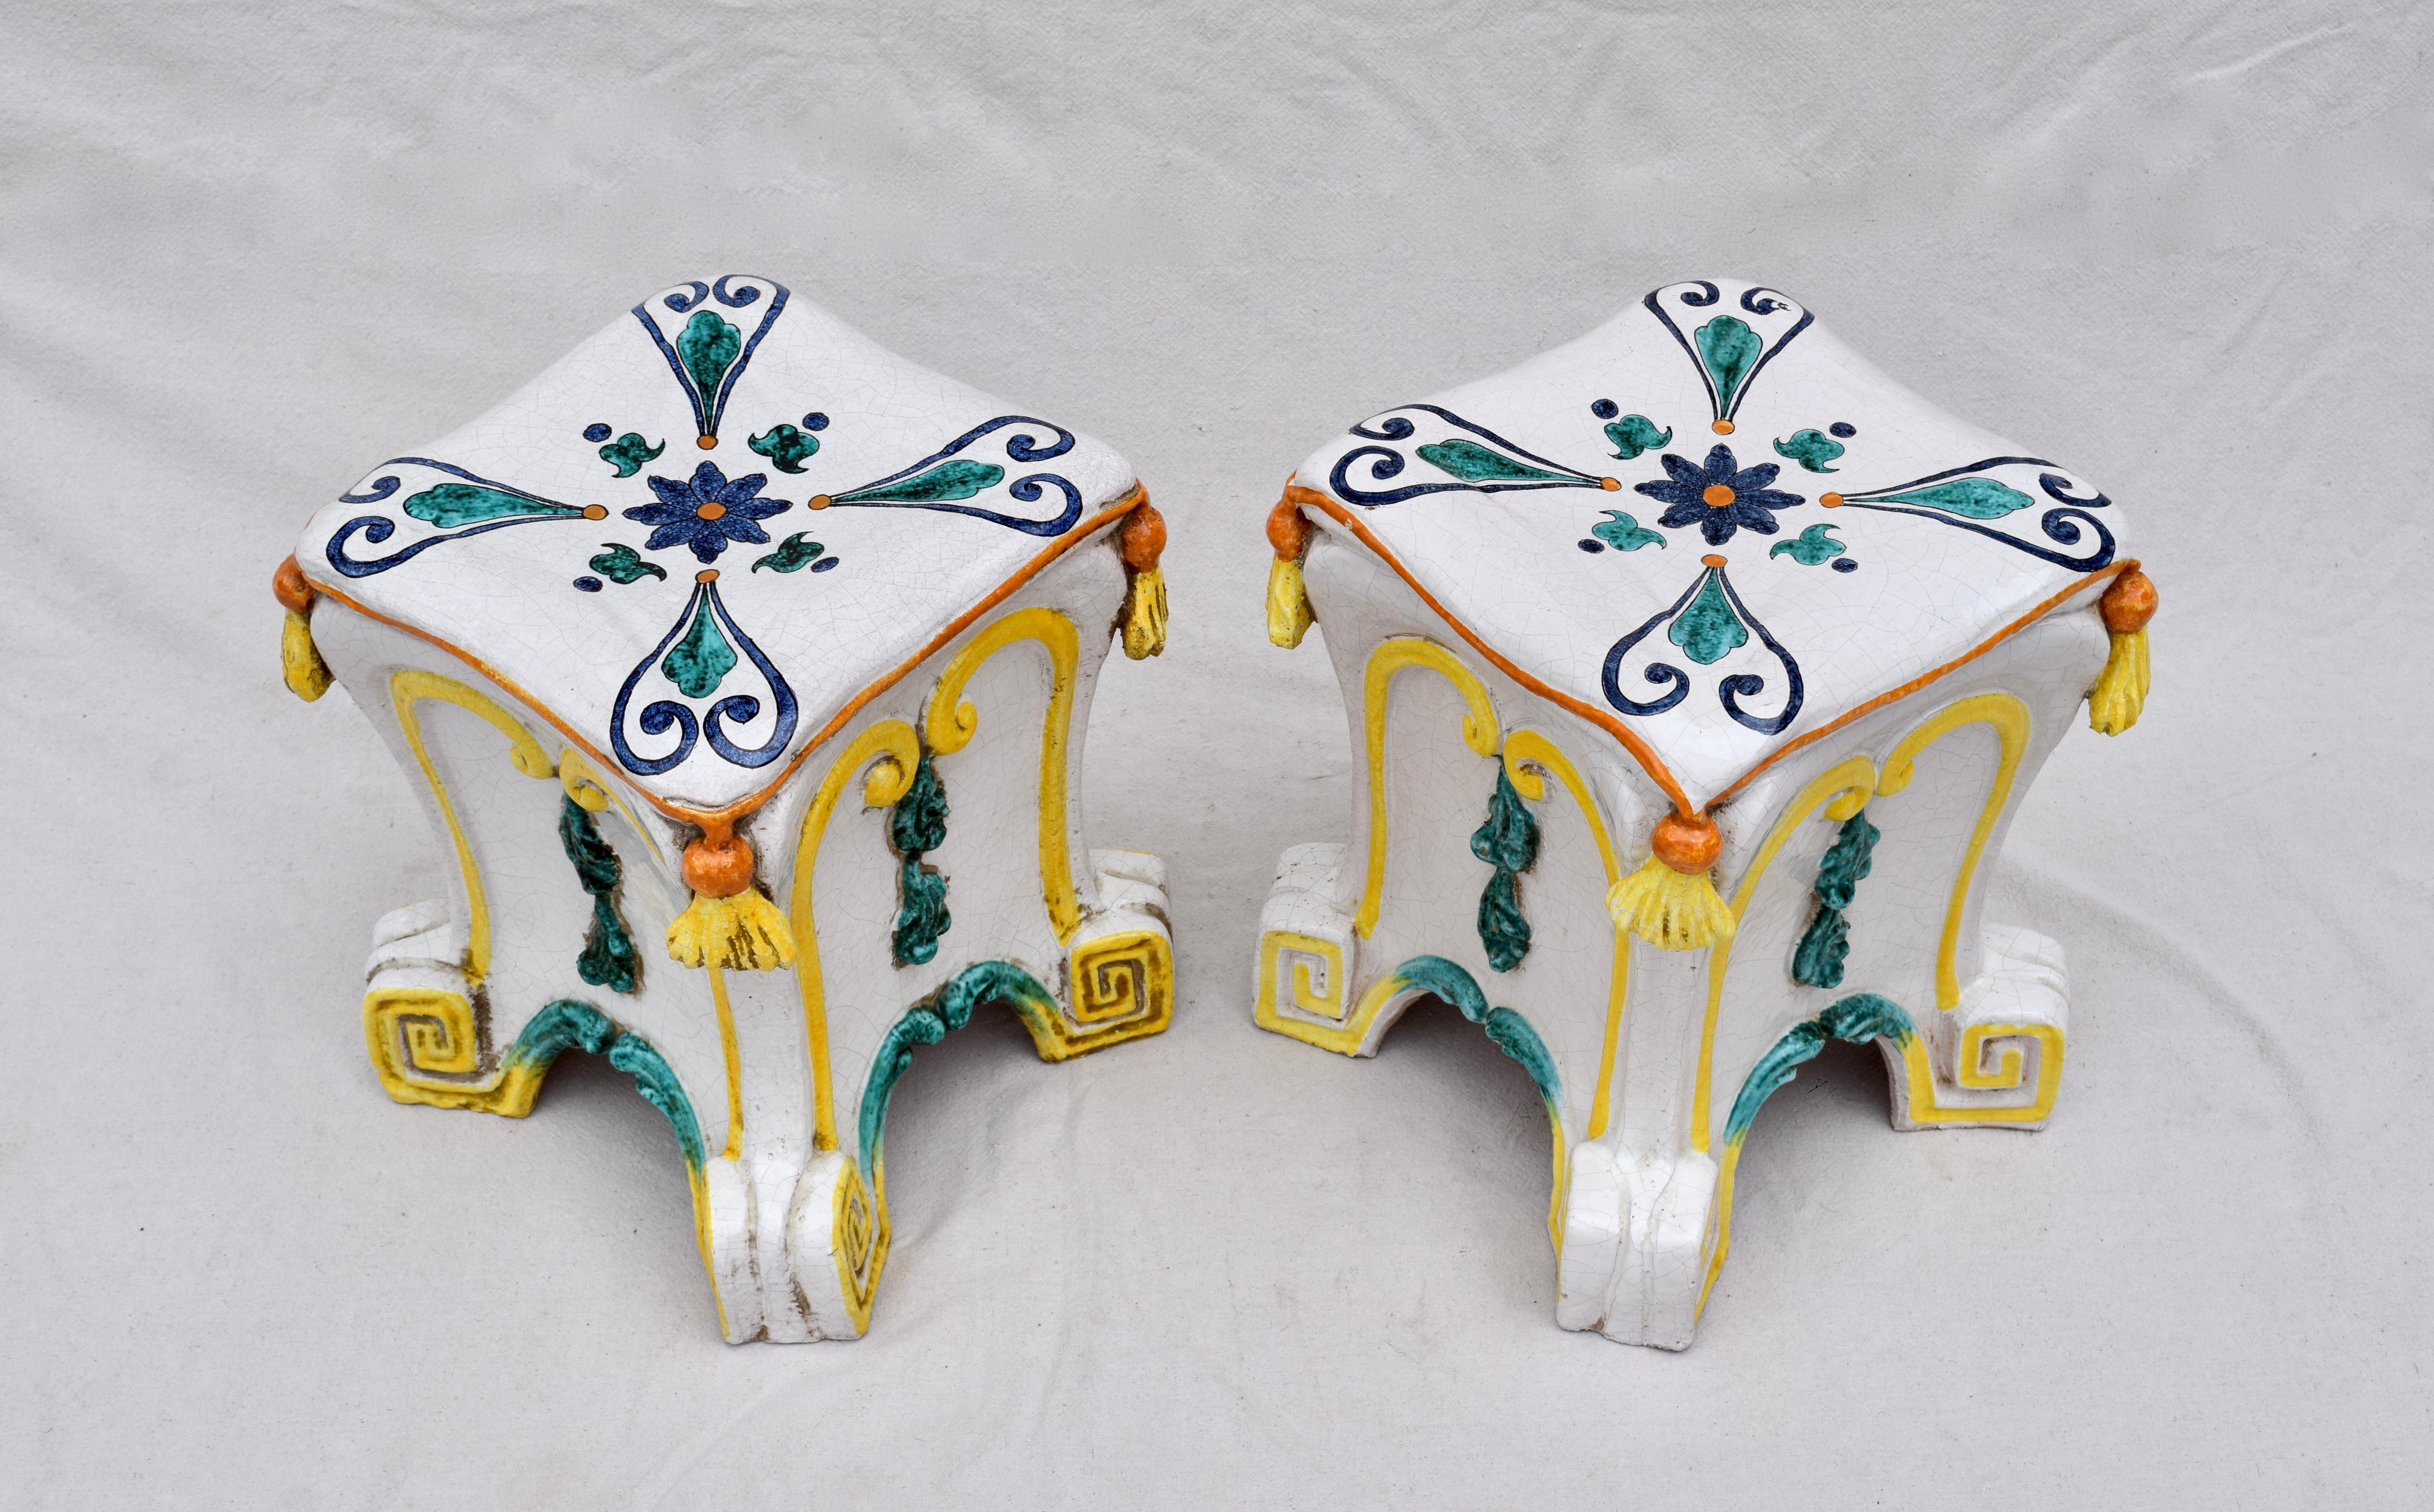 A pair of vibrantly painted and glazed terracotta garden stools with faux tassel cushions & Greek key motif base. Each is hand signed and numbered. Single family owned and imported from Italy in the 1970s.